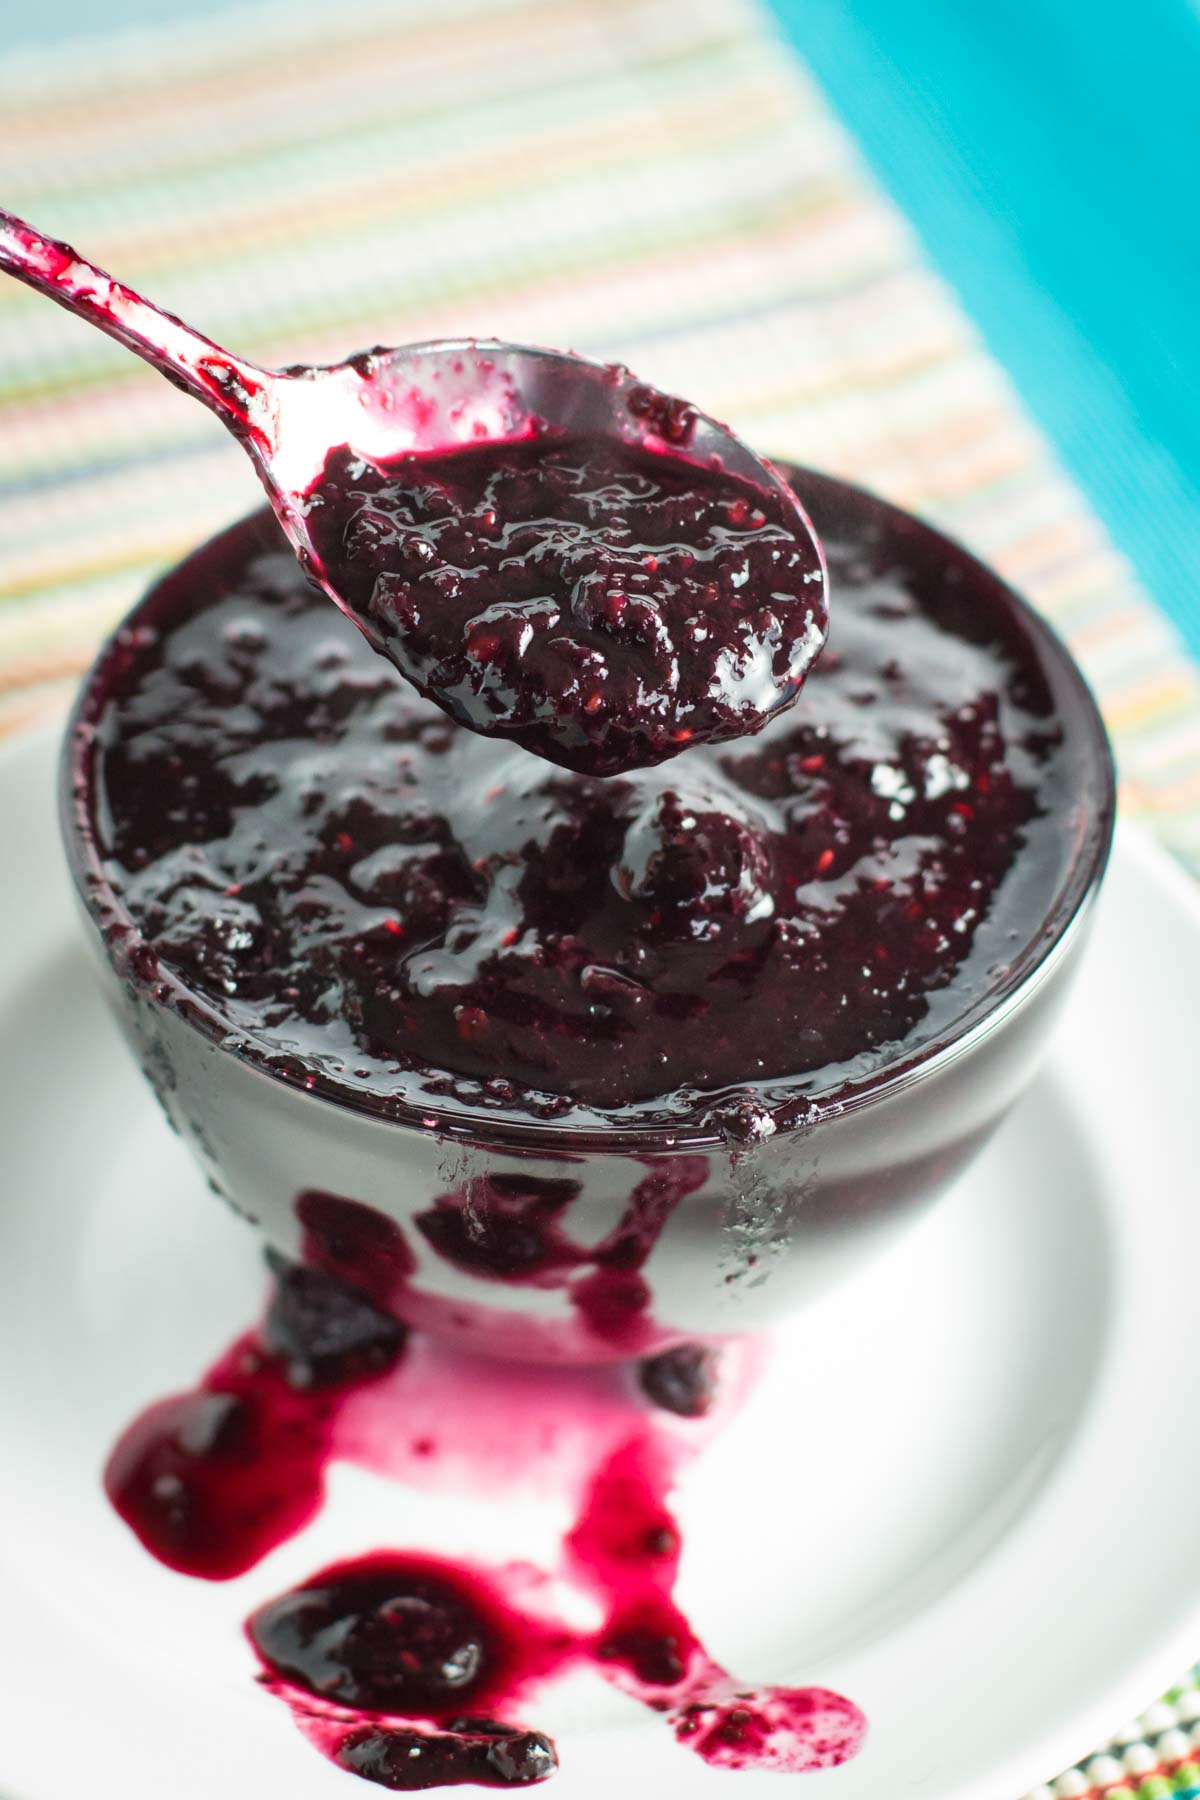 How to Make Preserves from Frozen Berries - The Weary Chef